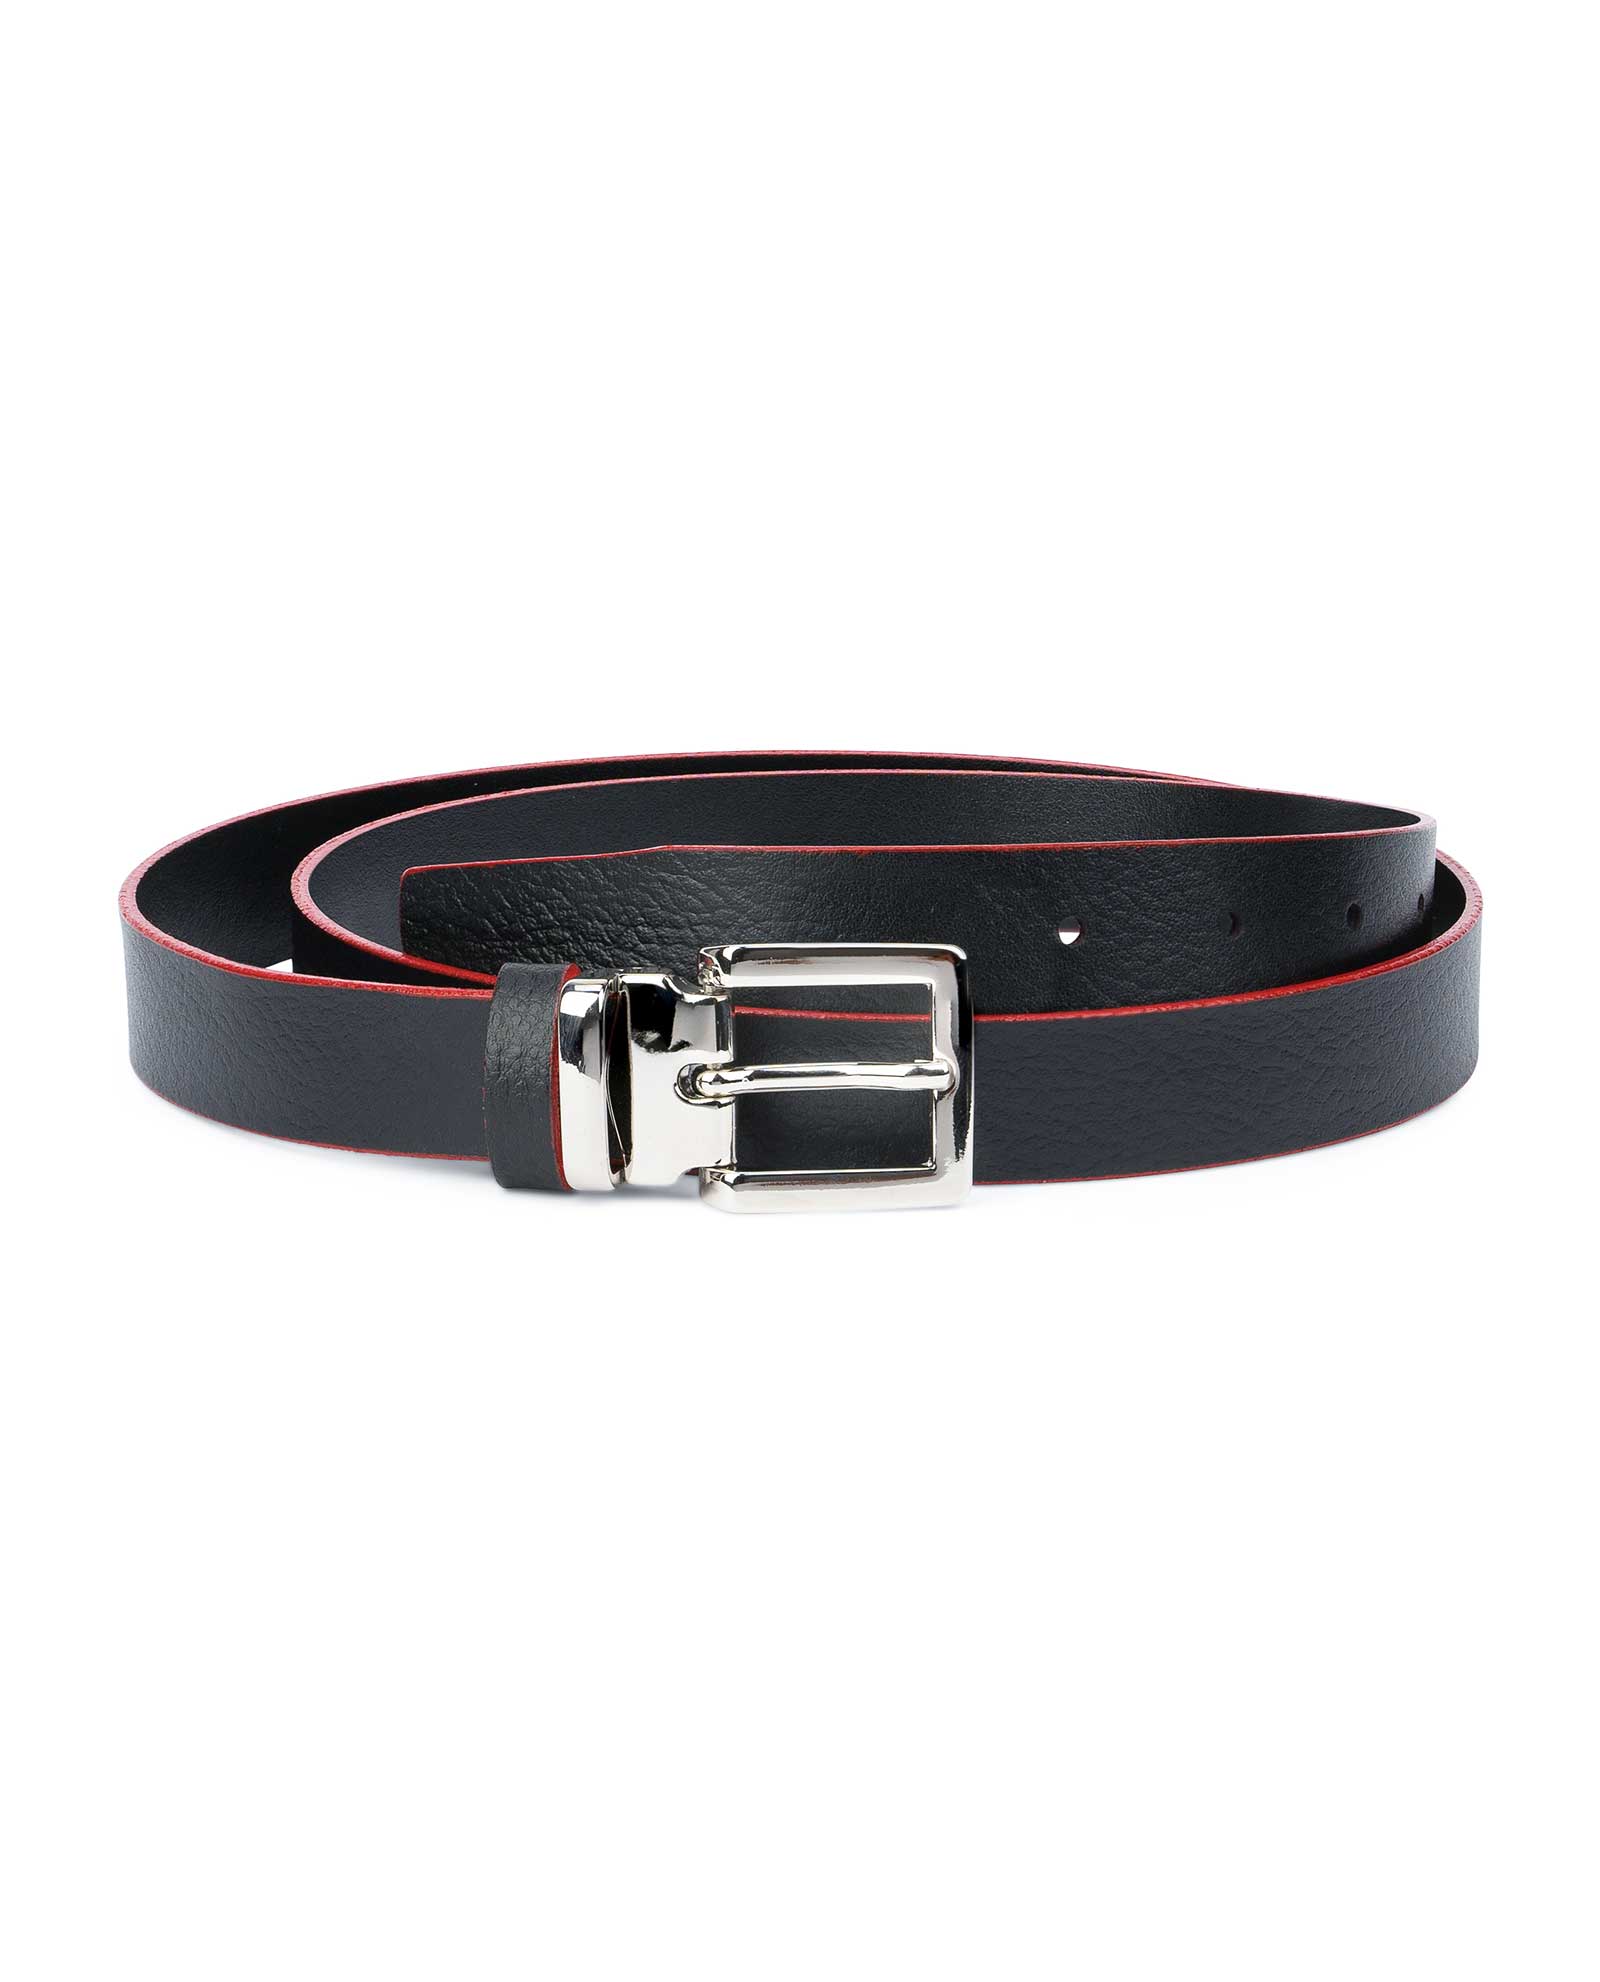 Buy Men's Thin Leather Belt | Black with Red Edges